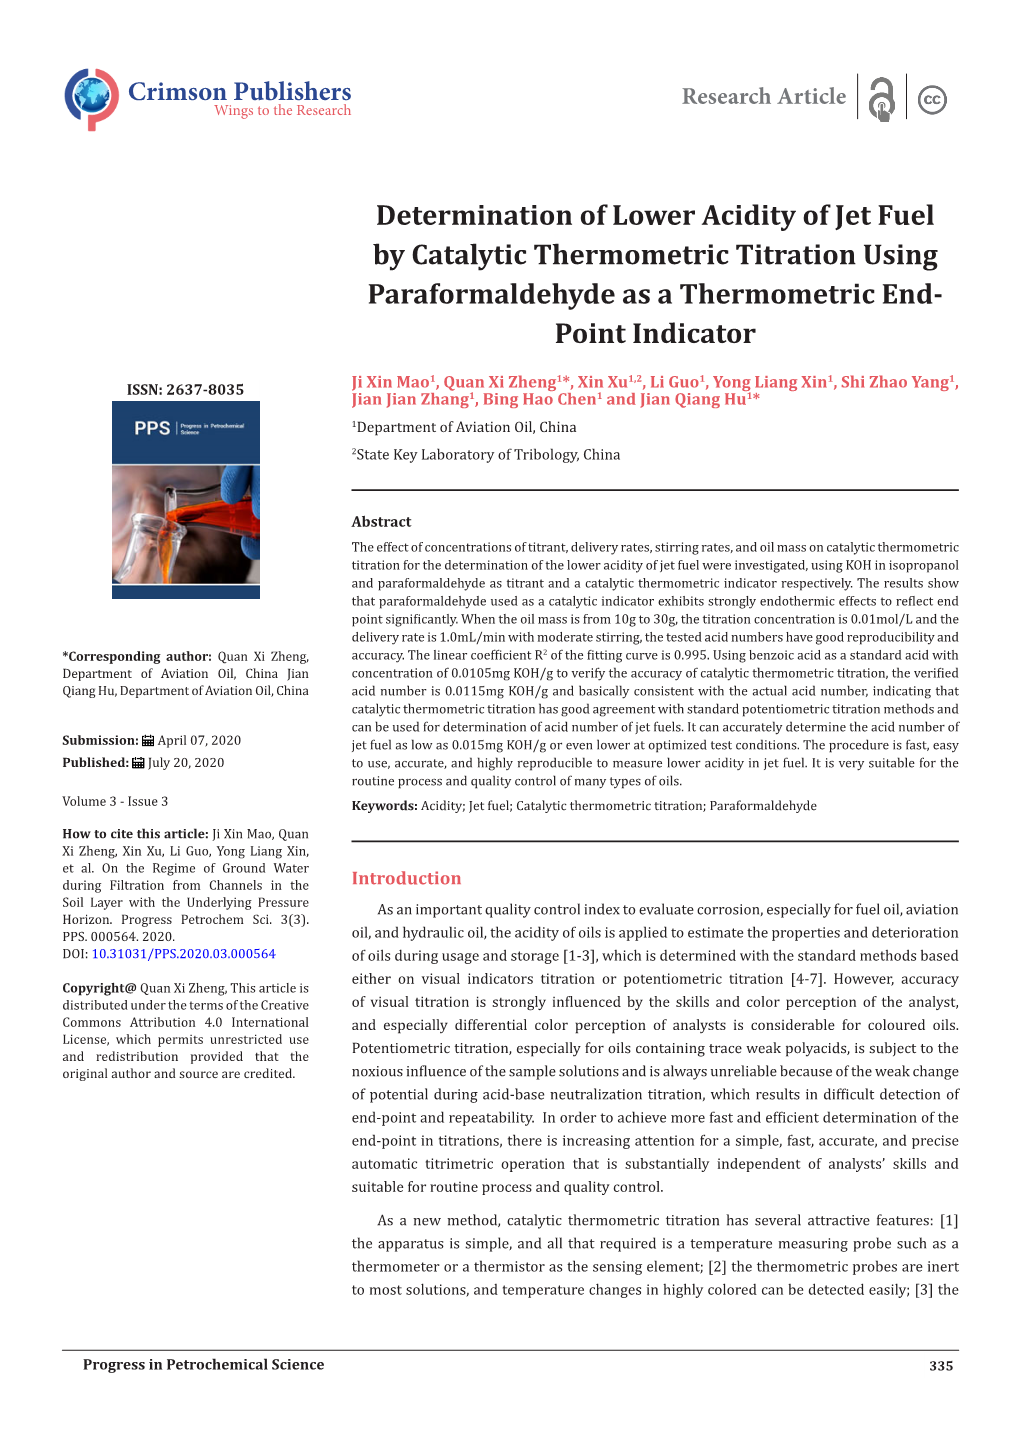 Determination of Lower Acidity of Jet Fuel by Catalytic Thermometric Titration Using Paraformaldehyde As a Thermometric End- Point Indicator